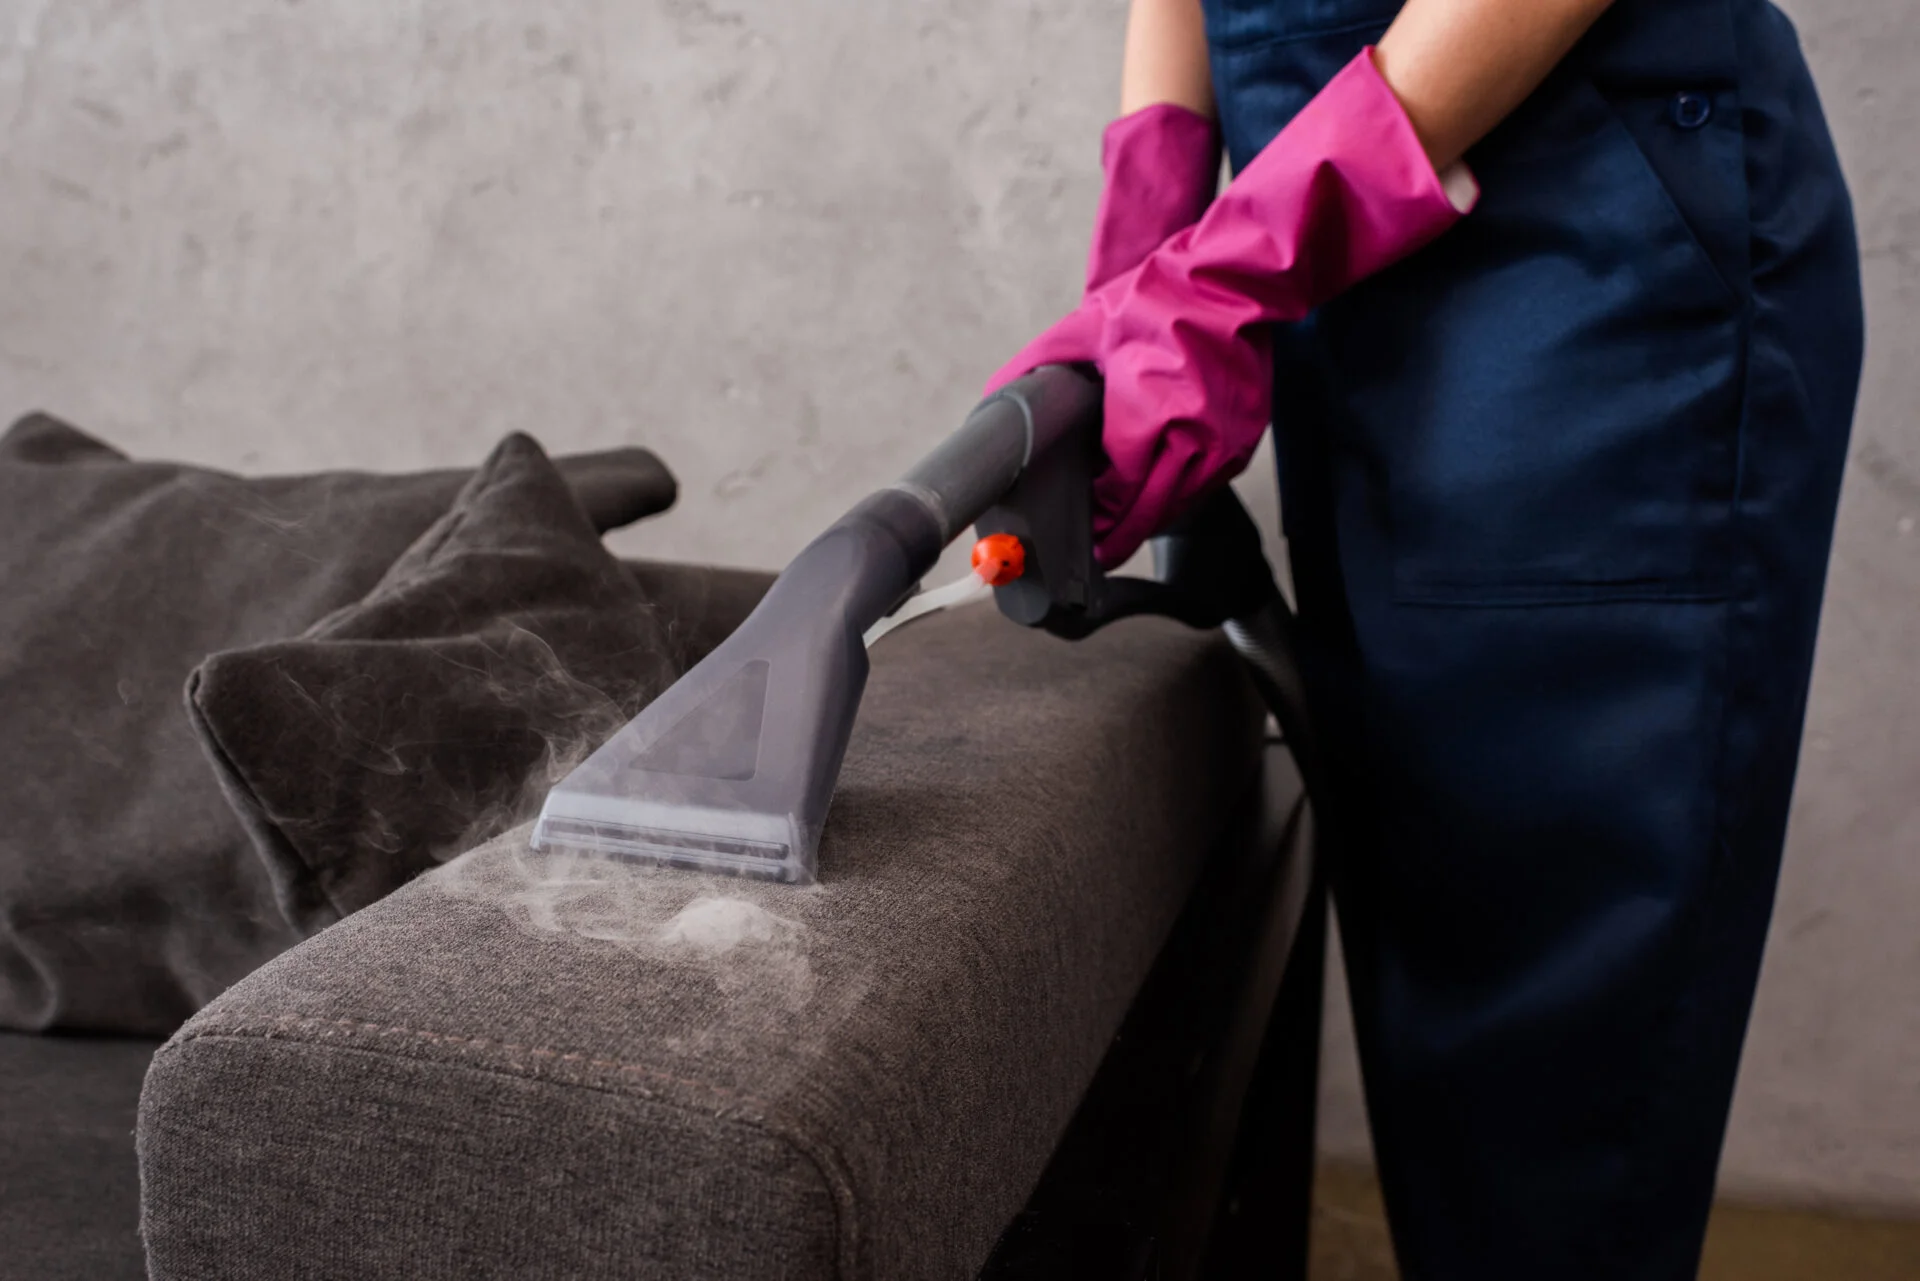 Woman cleaner her upholstery with non-toxic cleaner